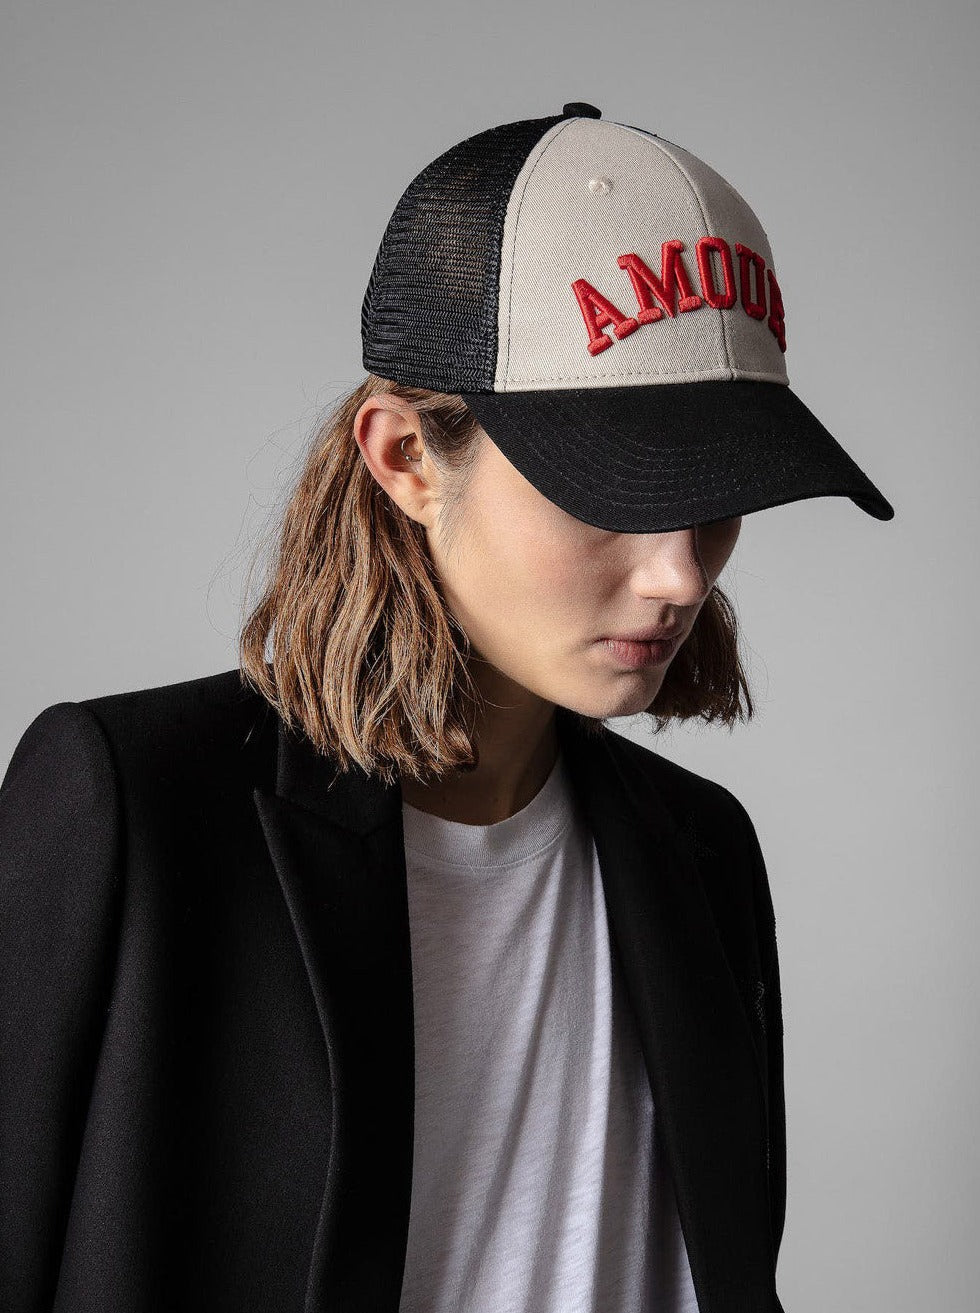 Embroidered 'Amour' baseball cap, black